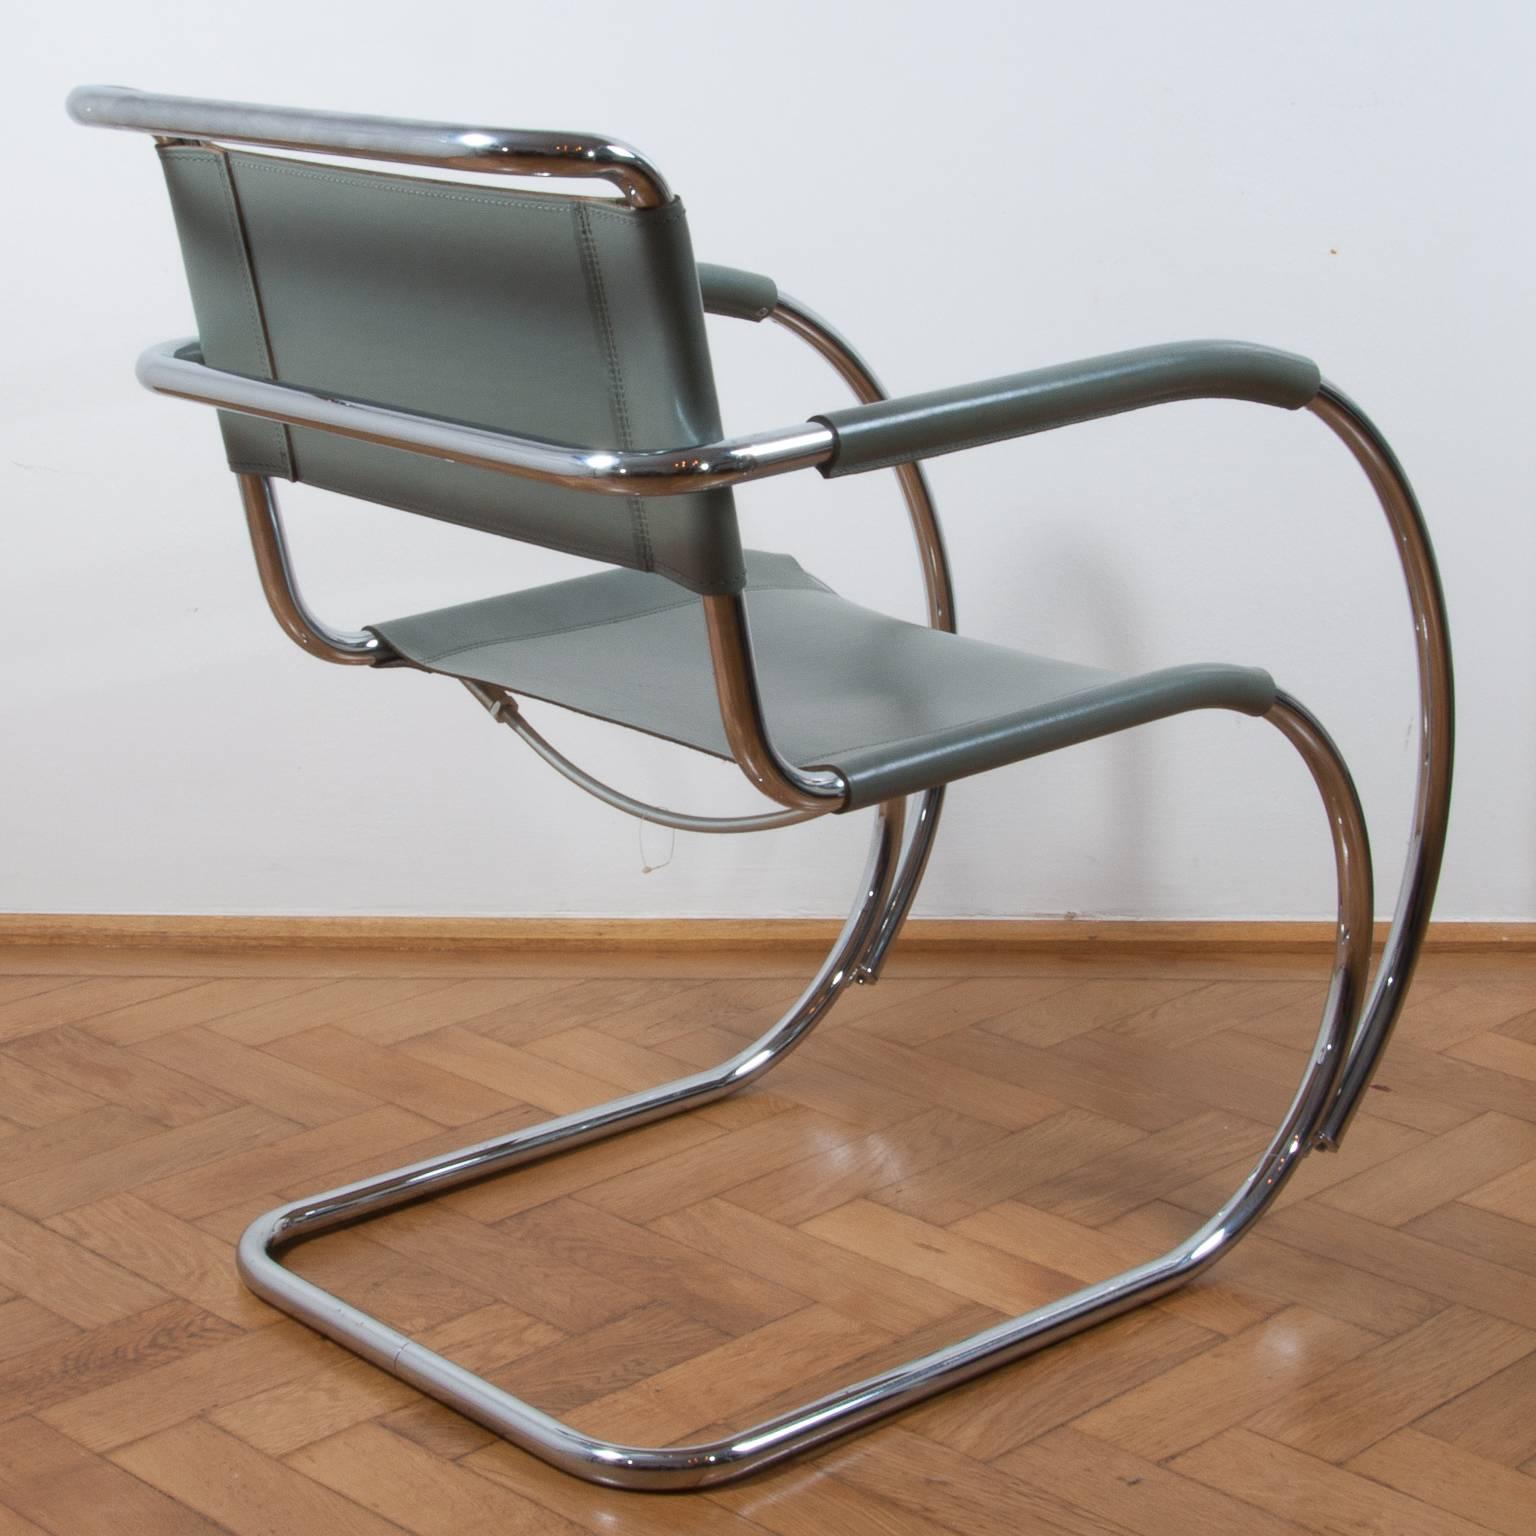 Bauhaus Thonet S533 Cantilever Chair, Armchair, Lounge Chair Designed by L. Mies vd Rohe For Sale